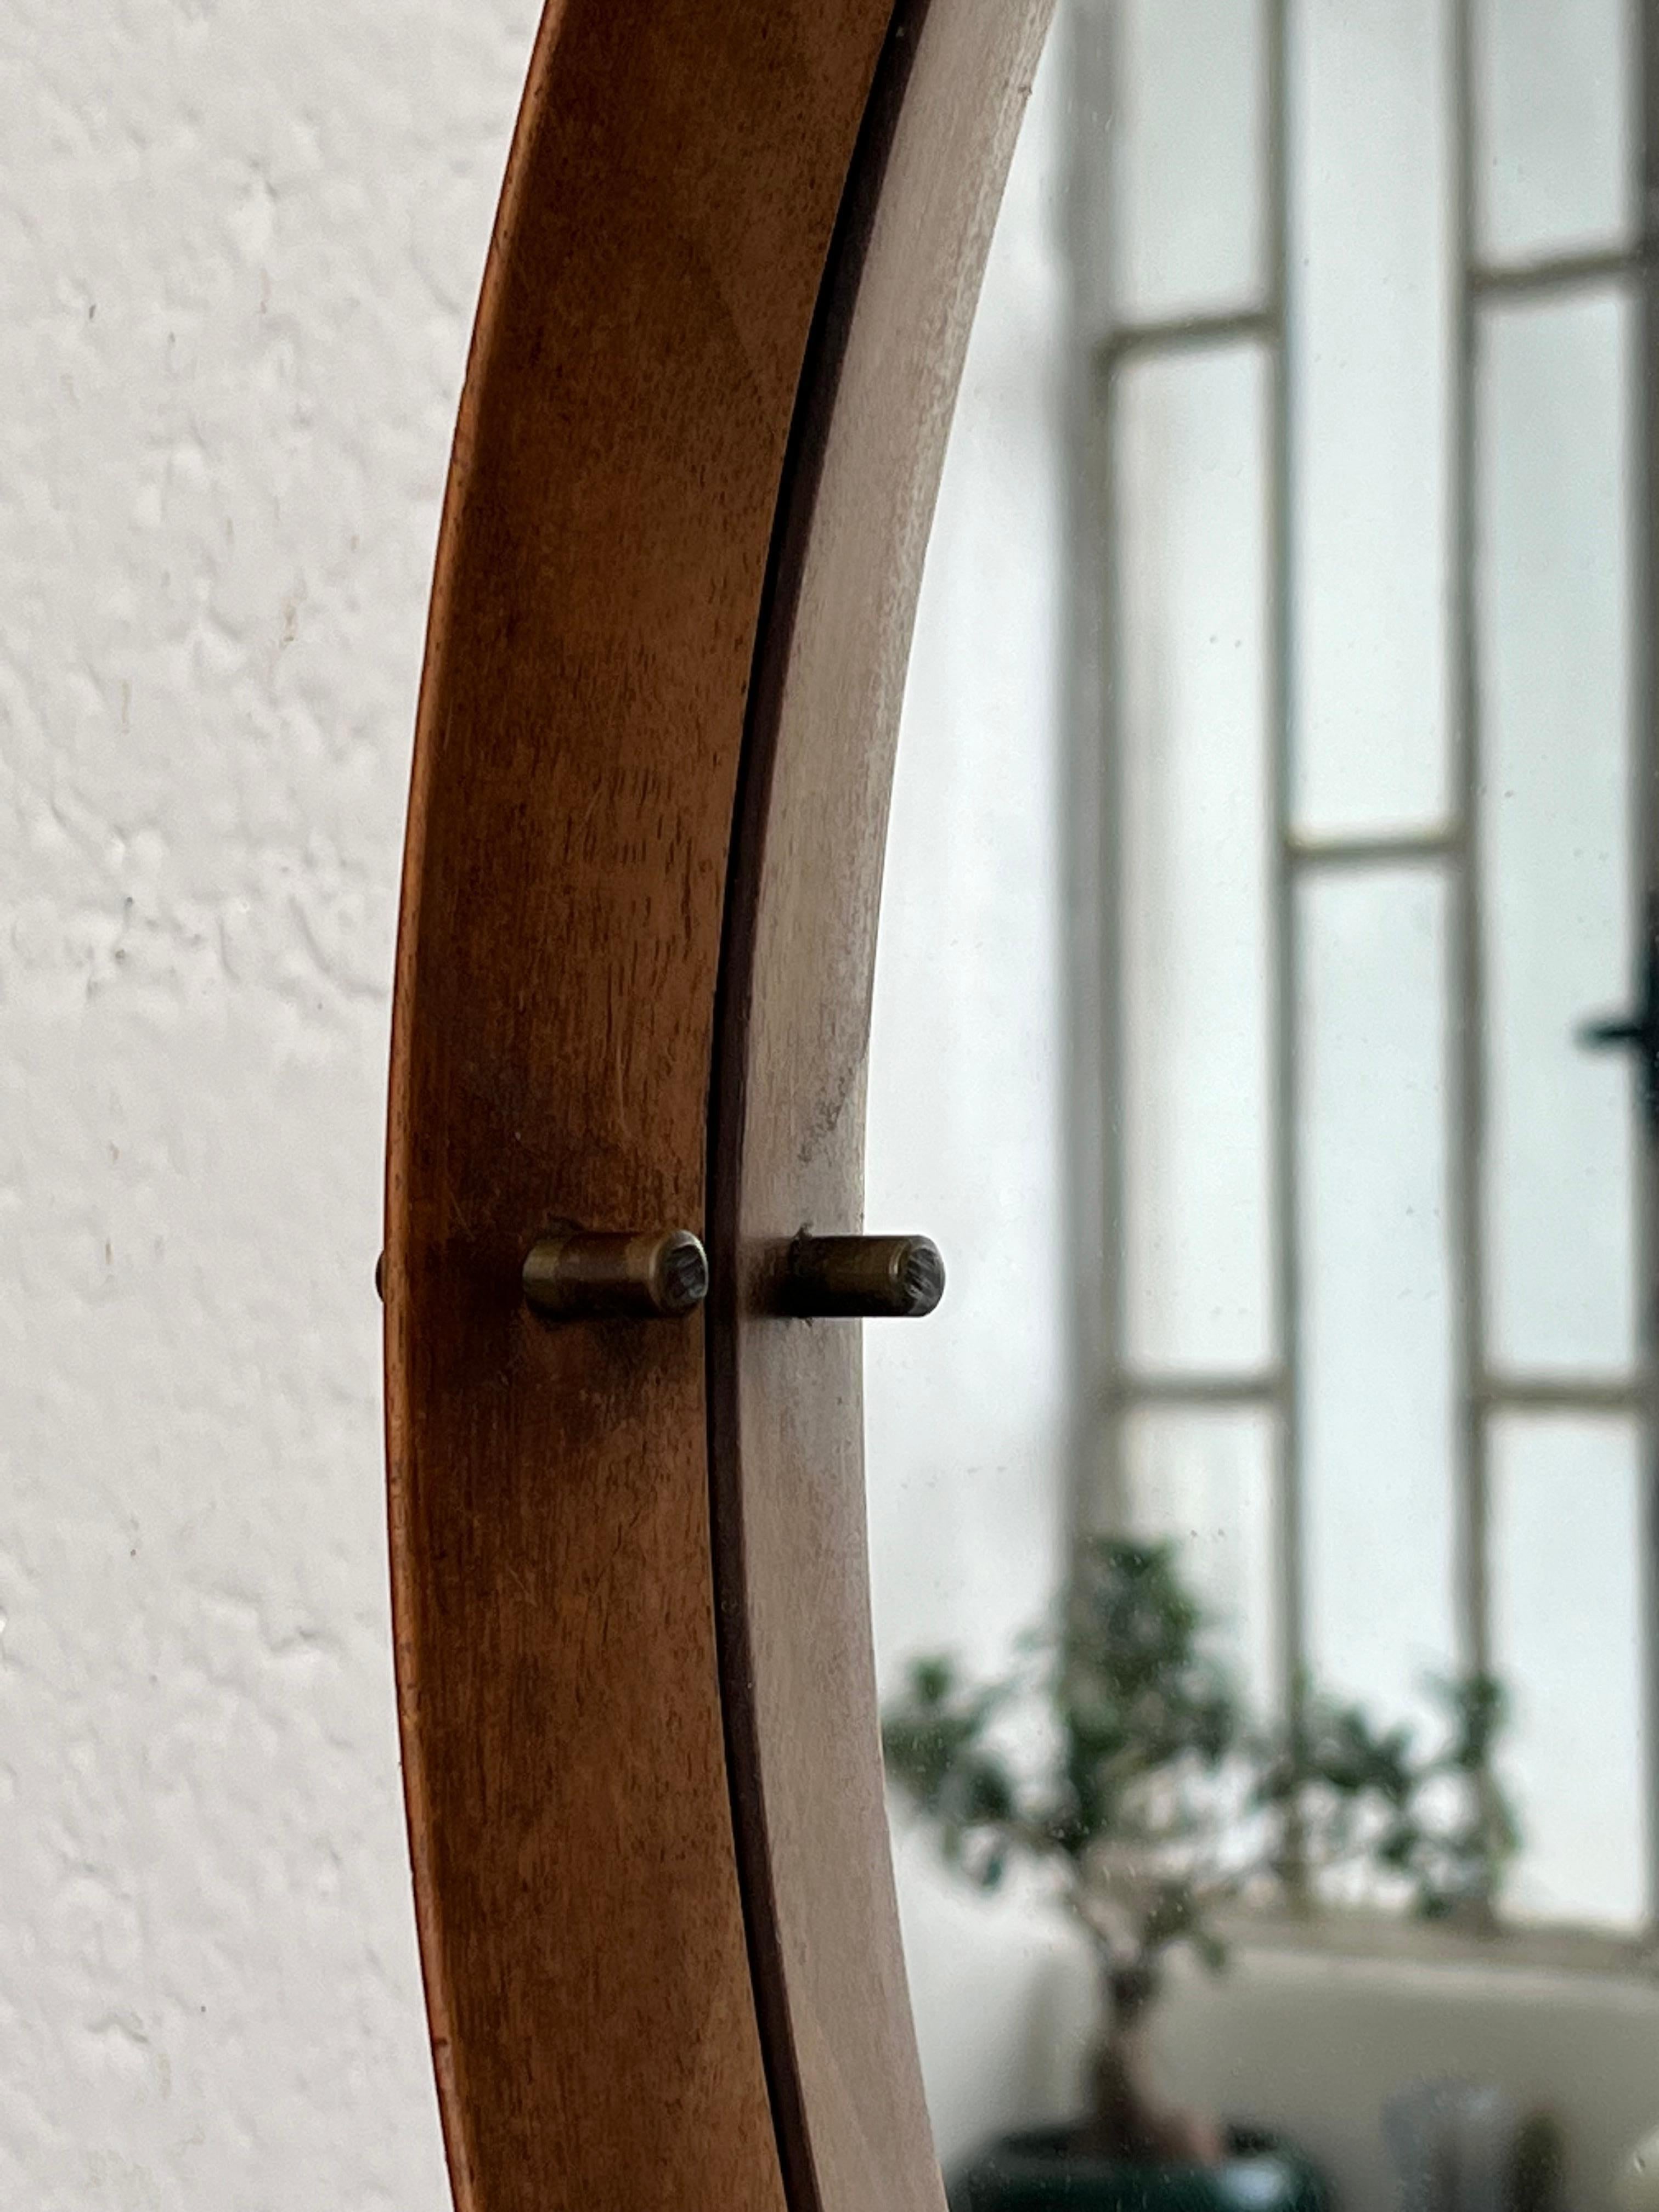 Mid-20th Century Vintage Italian 1960s Round Wall Mirror Attributed to Cassina, Wood and Brass For Sale